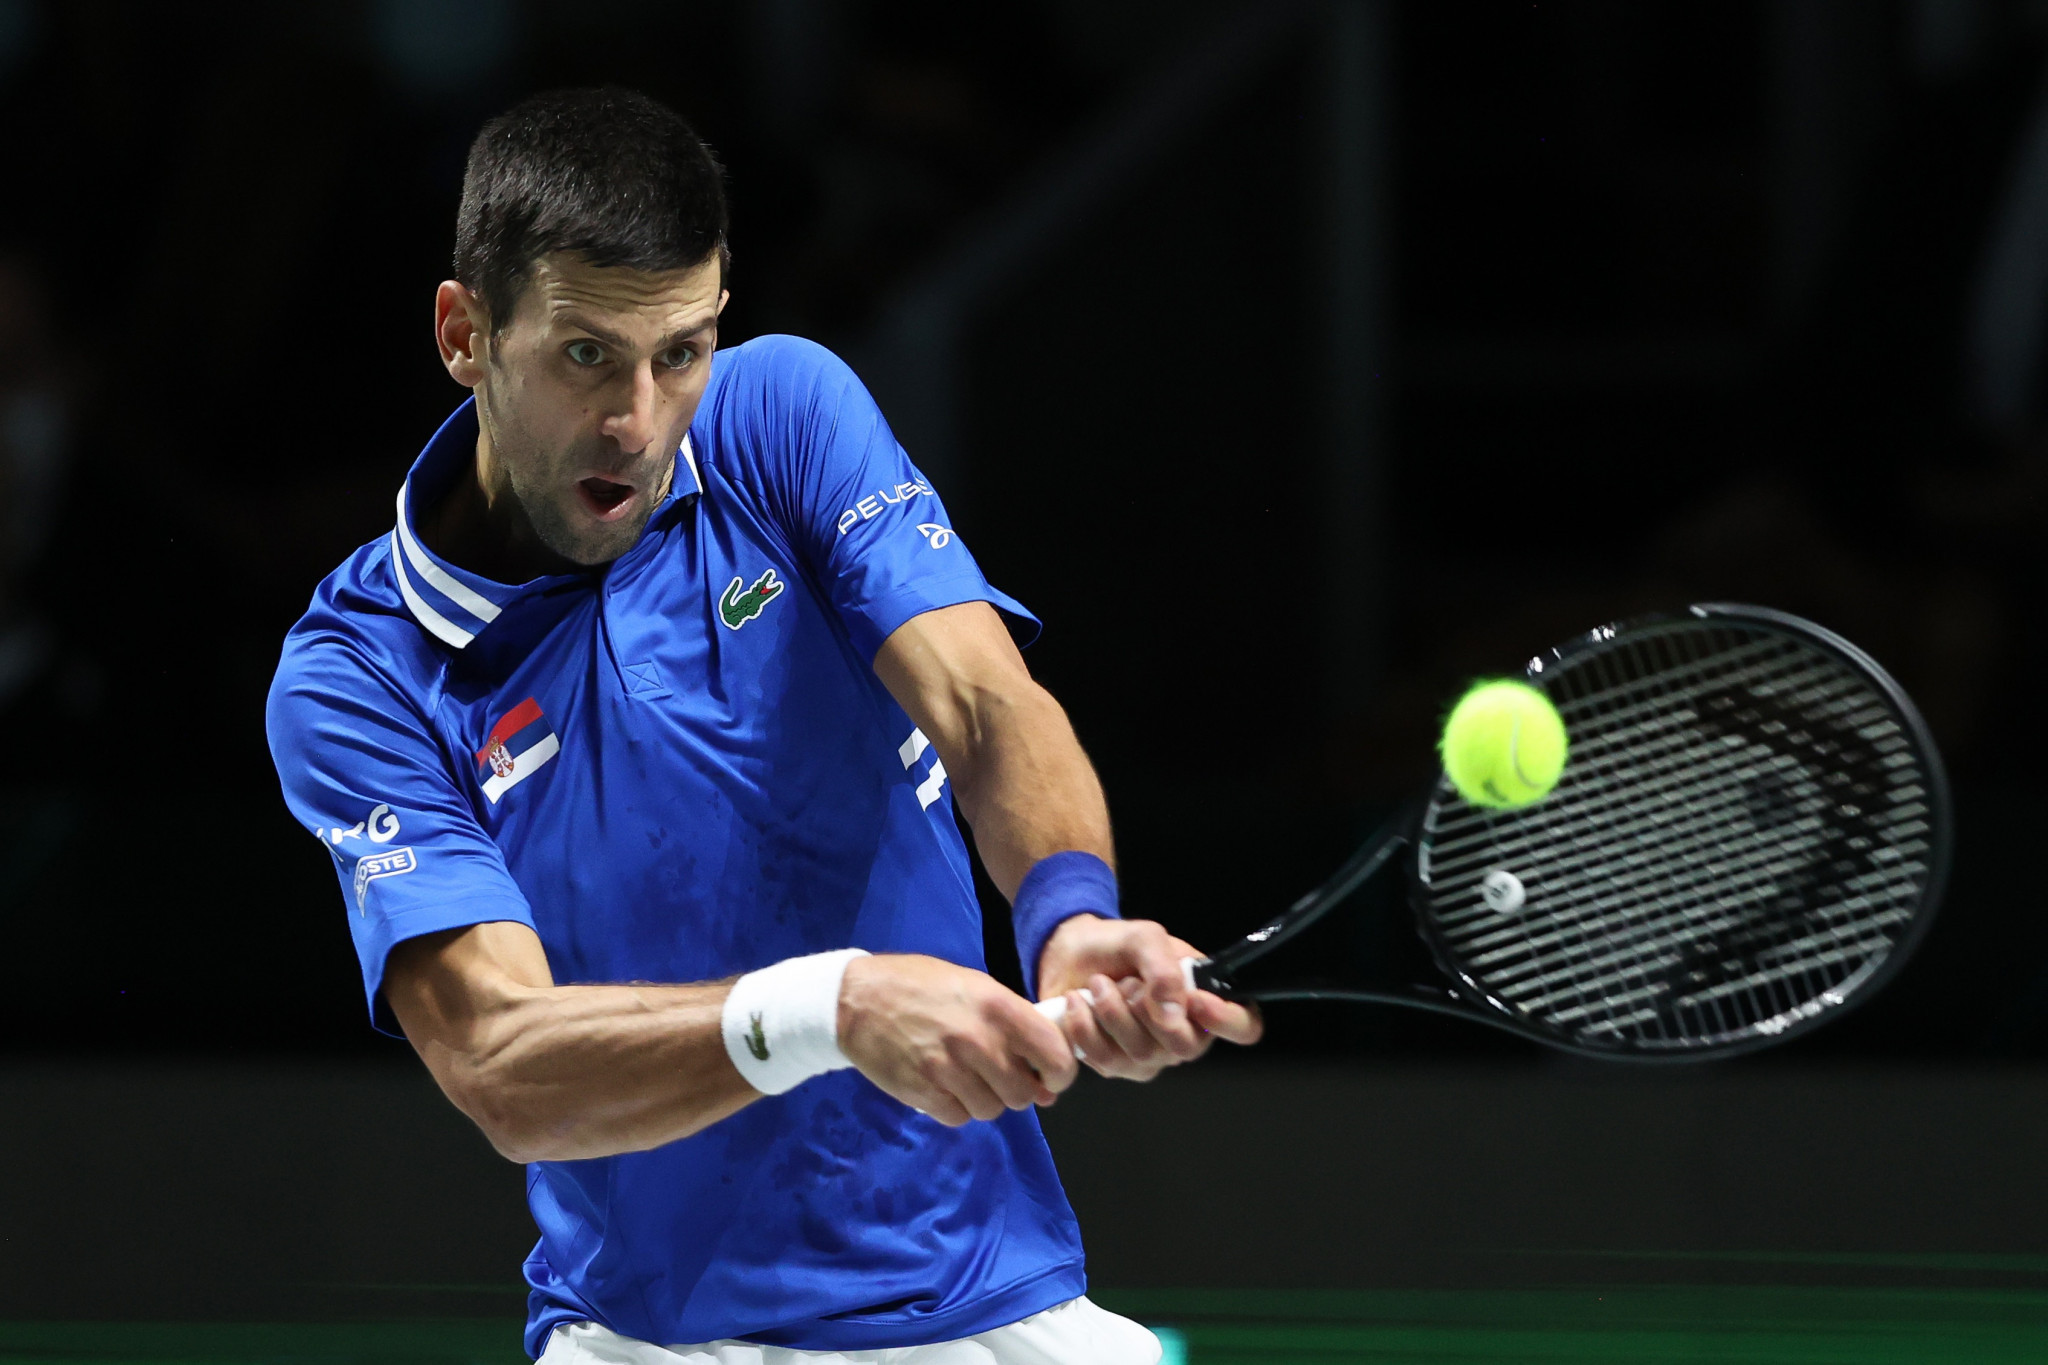 Djokovic to play in Australian Open after receiving COVID-19 vaccine exemption